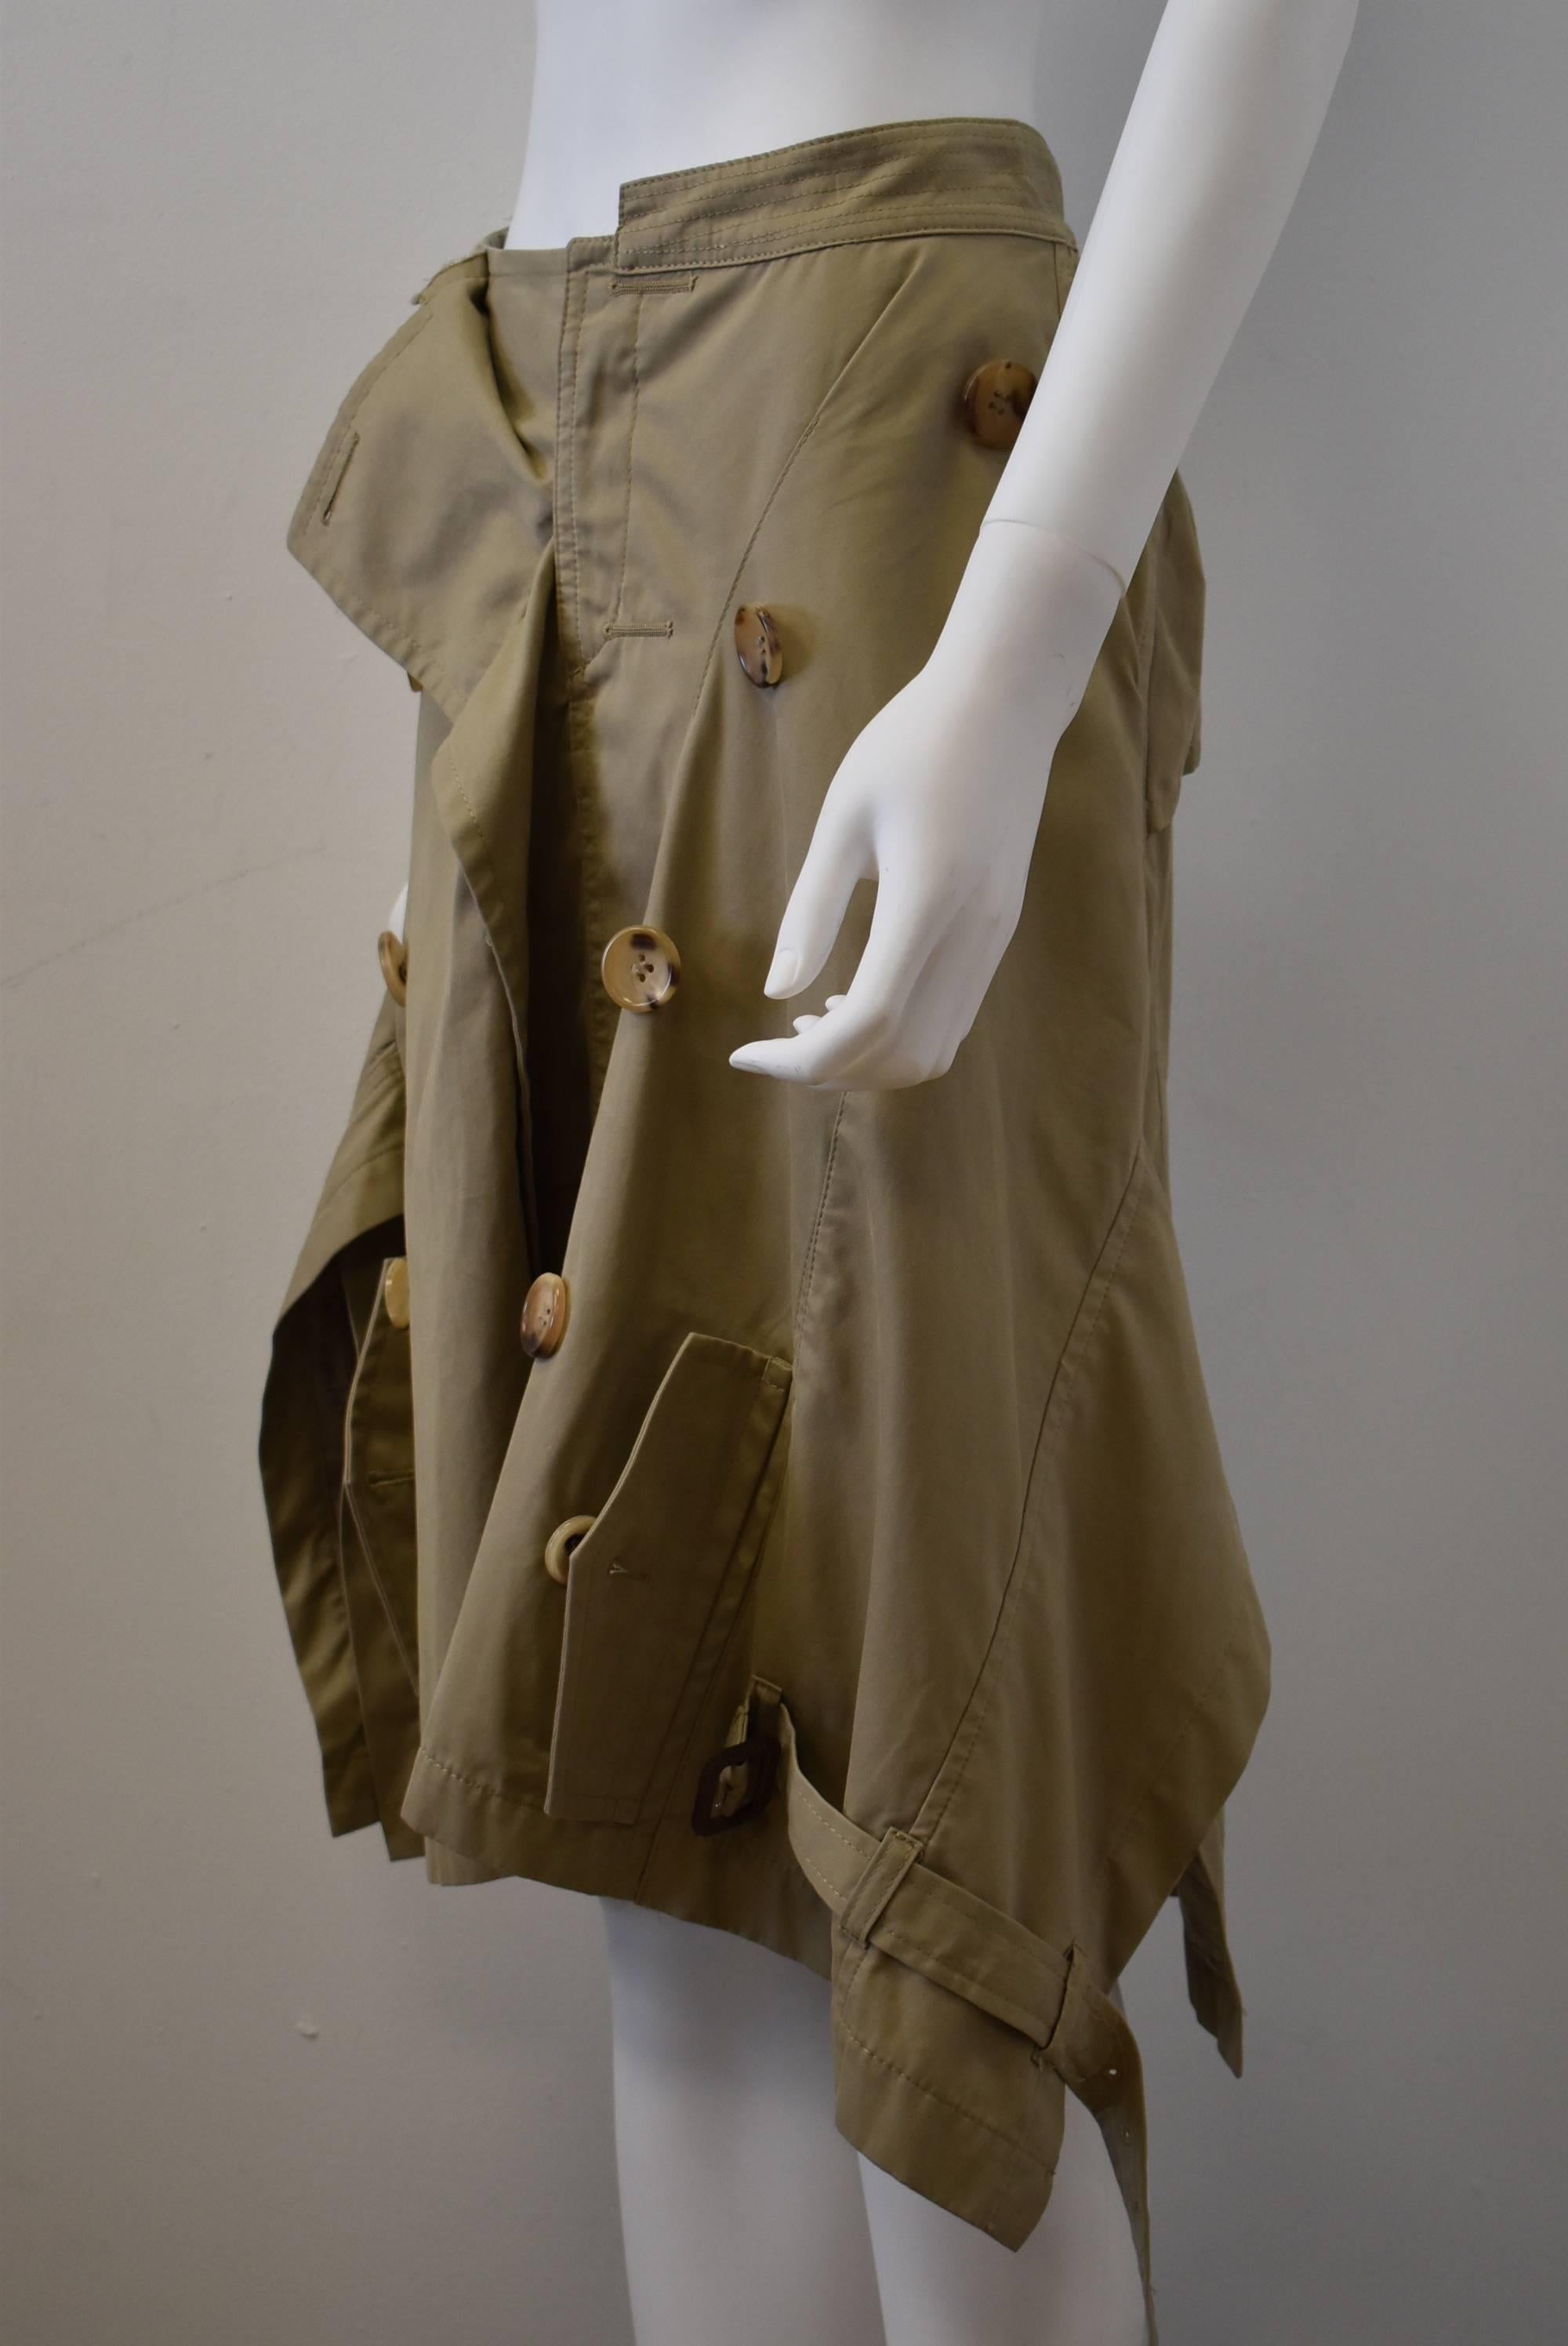 A deconstructed trench coat dress from Comme des Garçons designer Junya Watanabe. The waistline of the skirt is made from the coat collar and the double breasted buttons run along the length of the skirt. There are pockets at the bottom of the